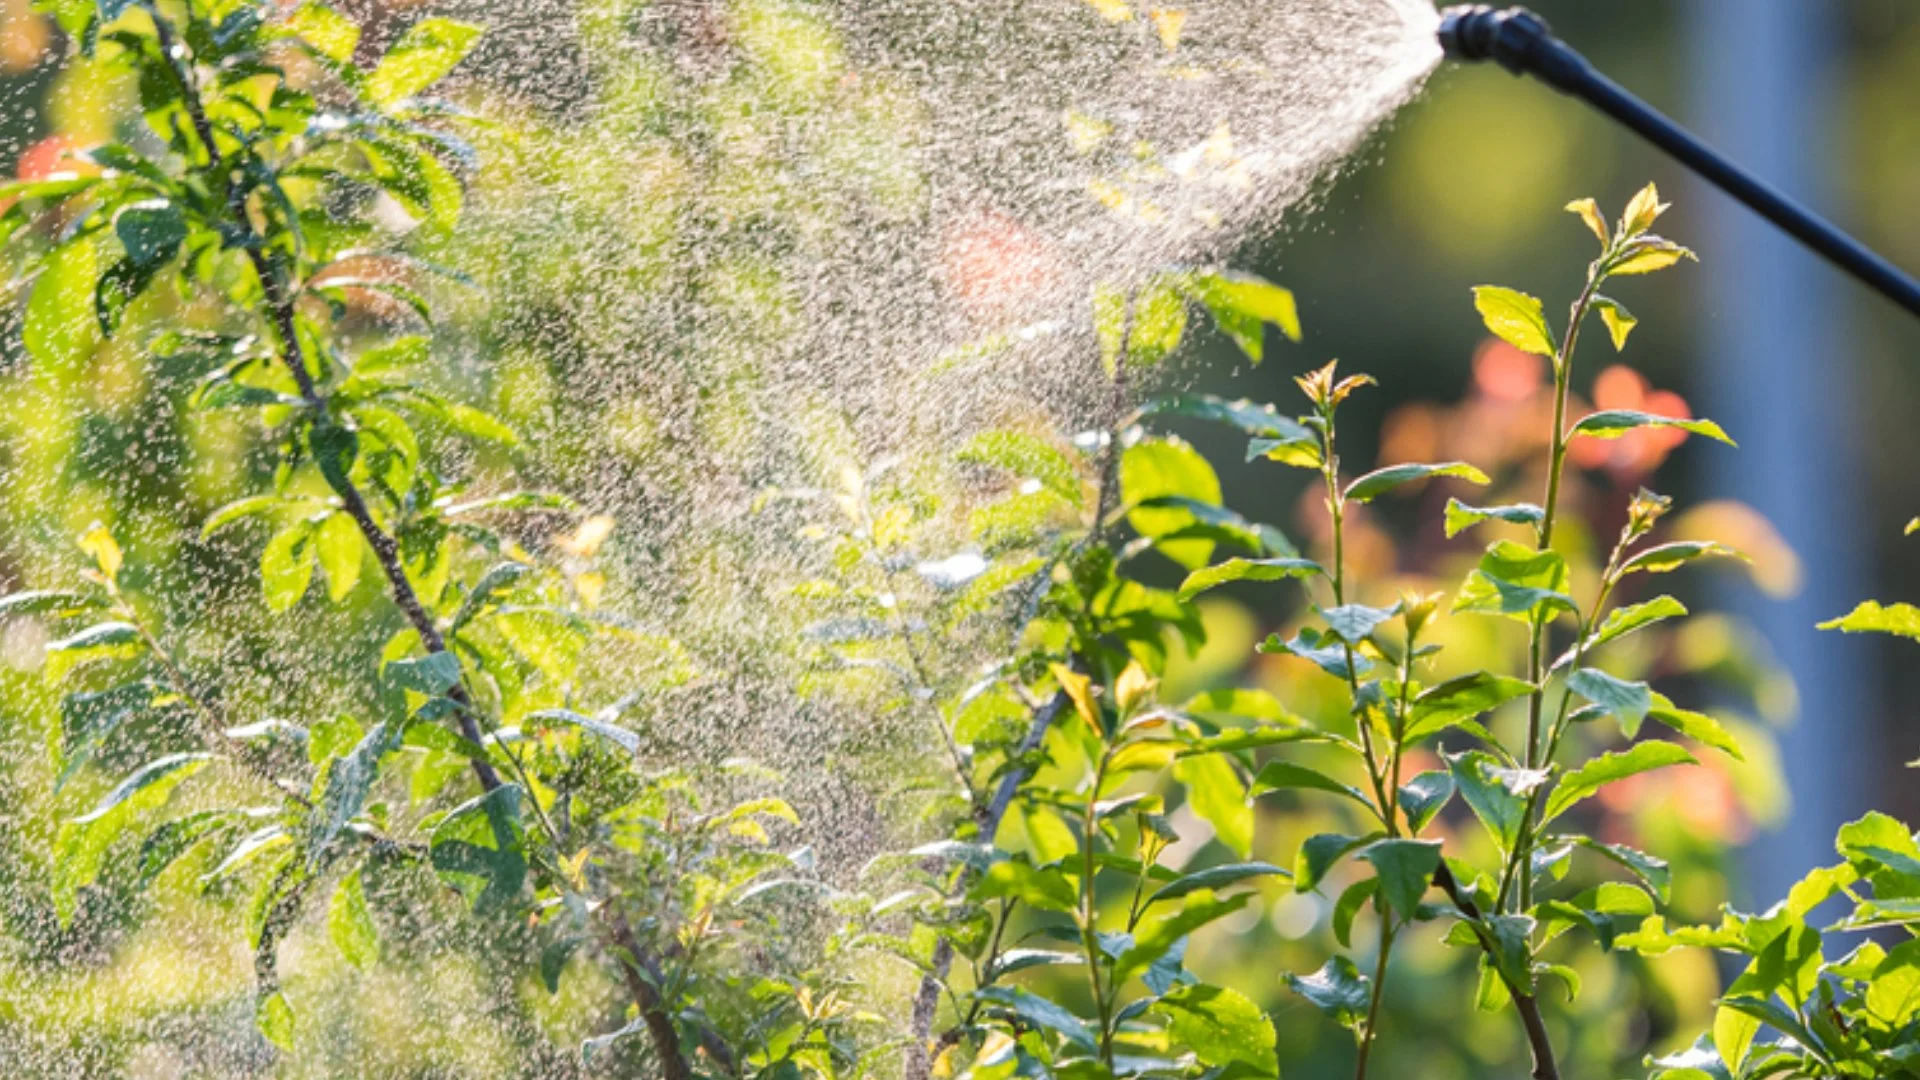 What Is Pre-Emergent Weed Control & When Should It Be Applied?